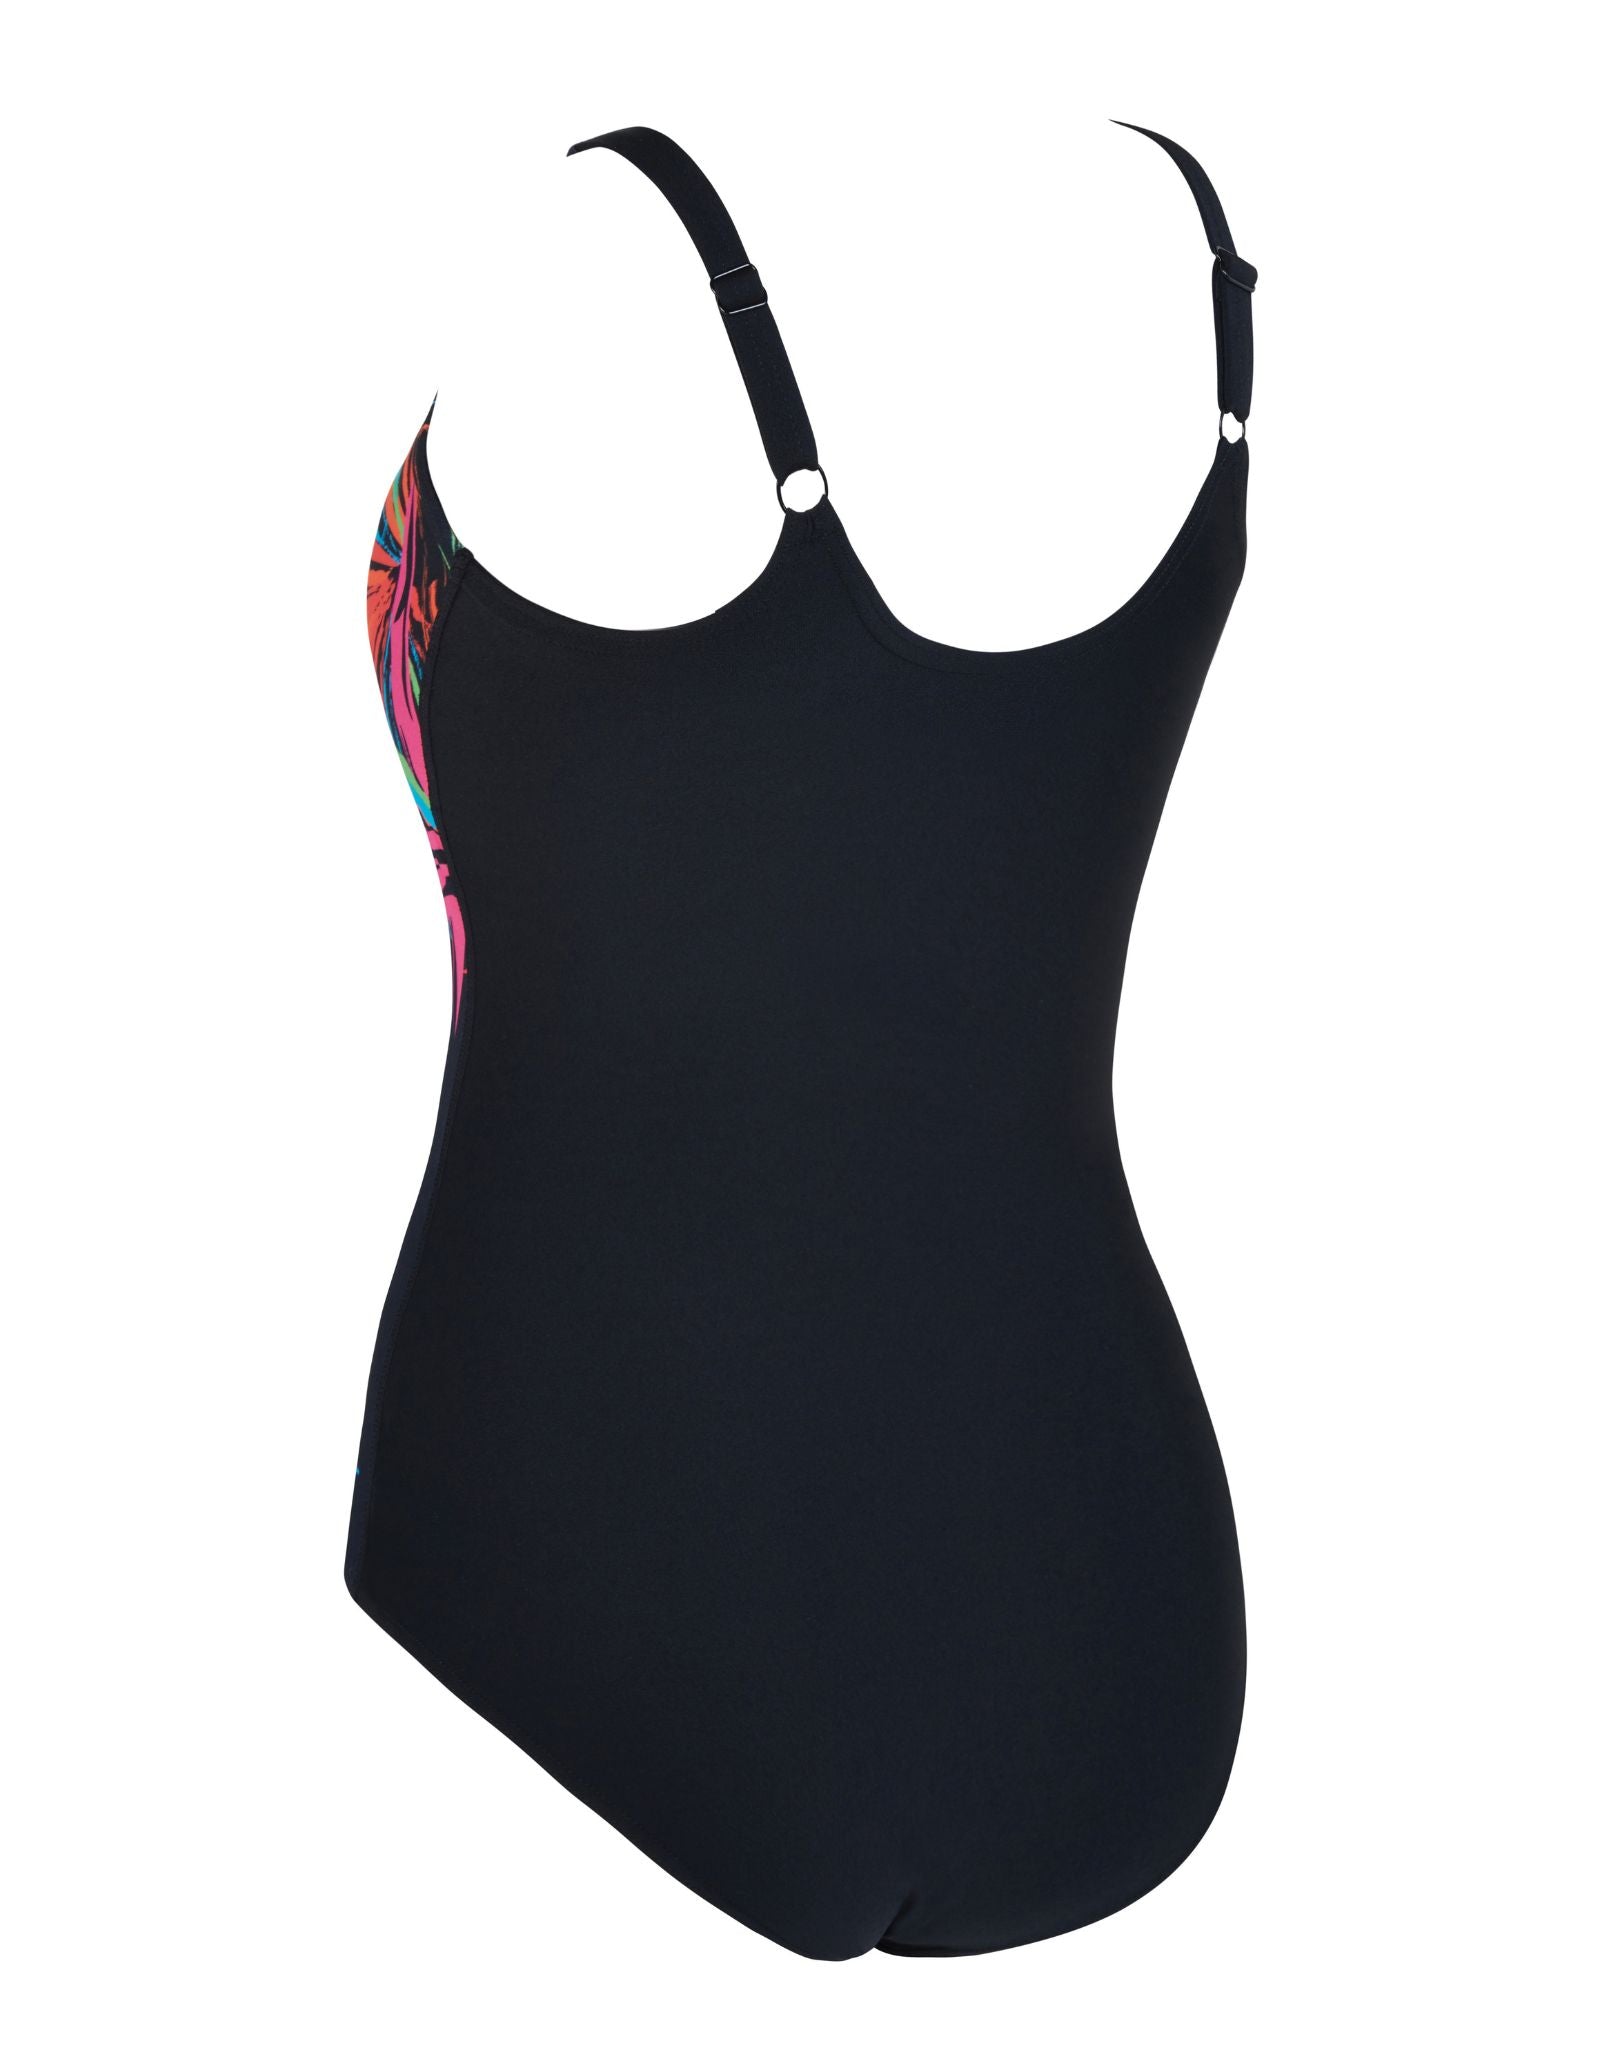 Buy Zoggs Black Marley Scoopback One Piece Swimsuit from Next Canada